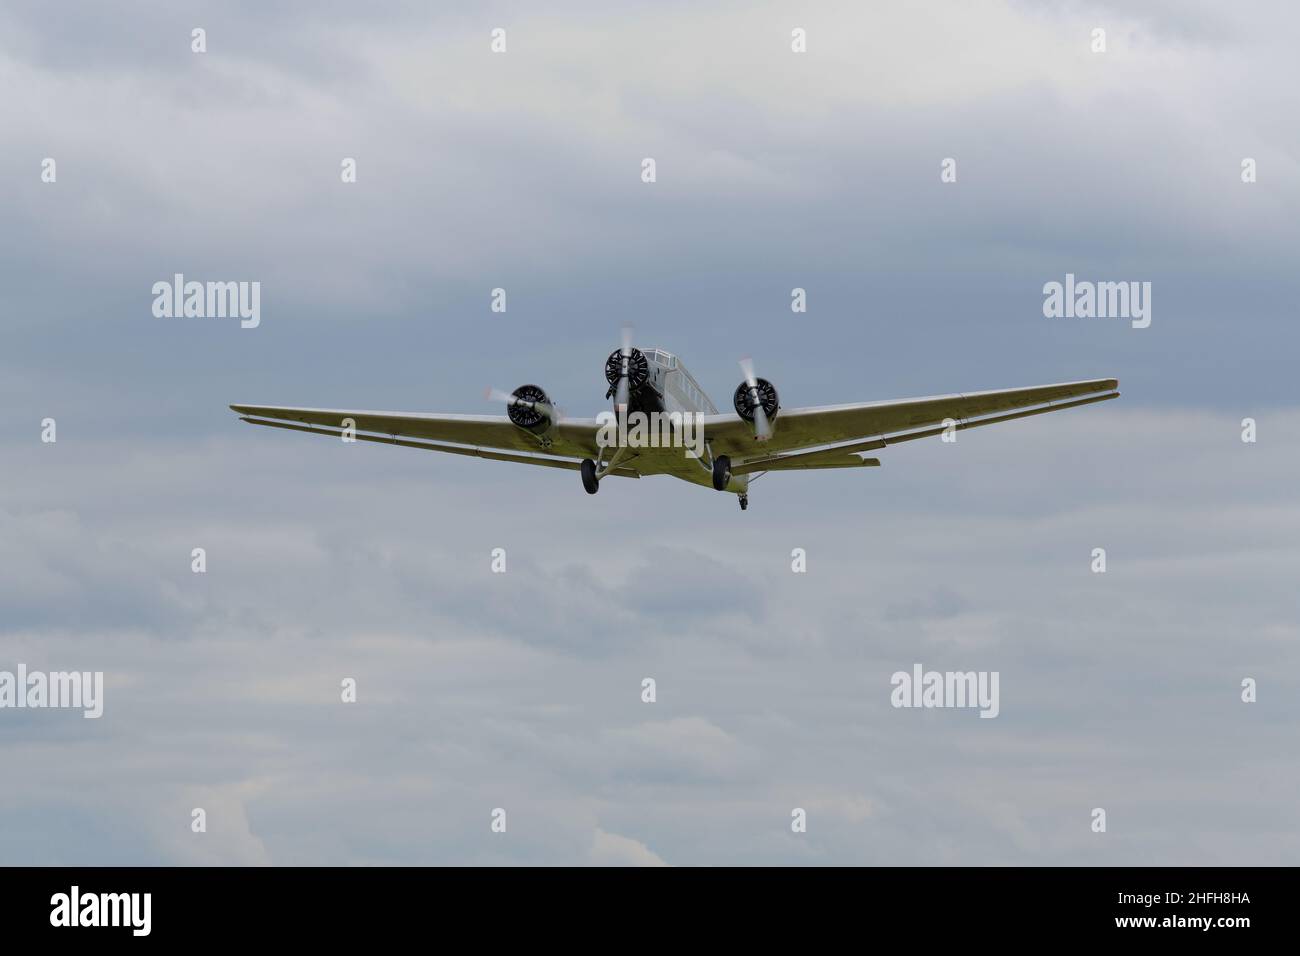 an old three-engine airliner in flight, the Ju 52 Stock Photo